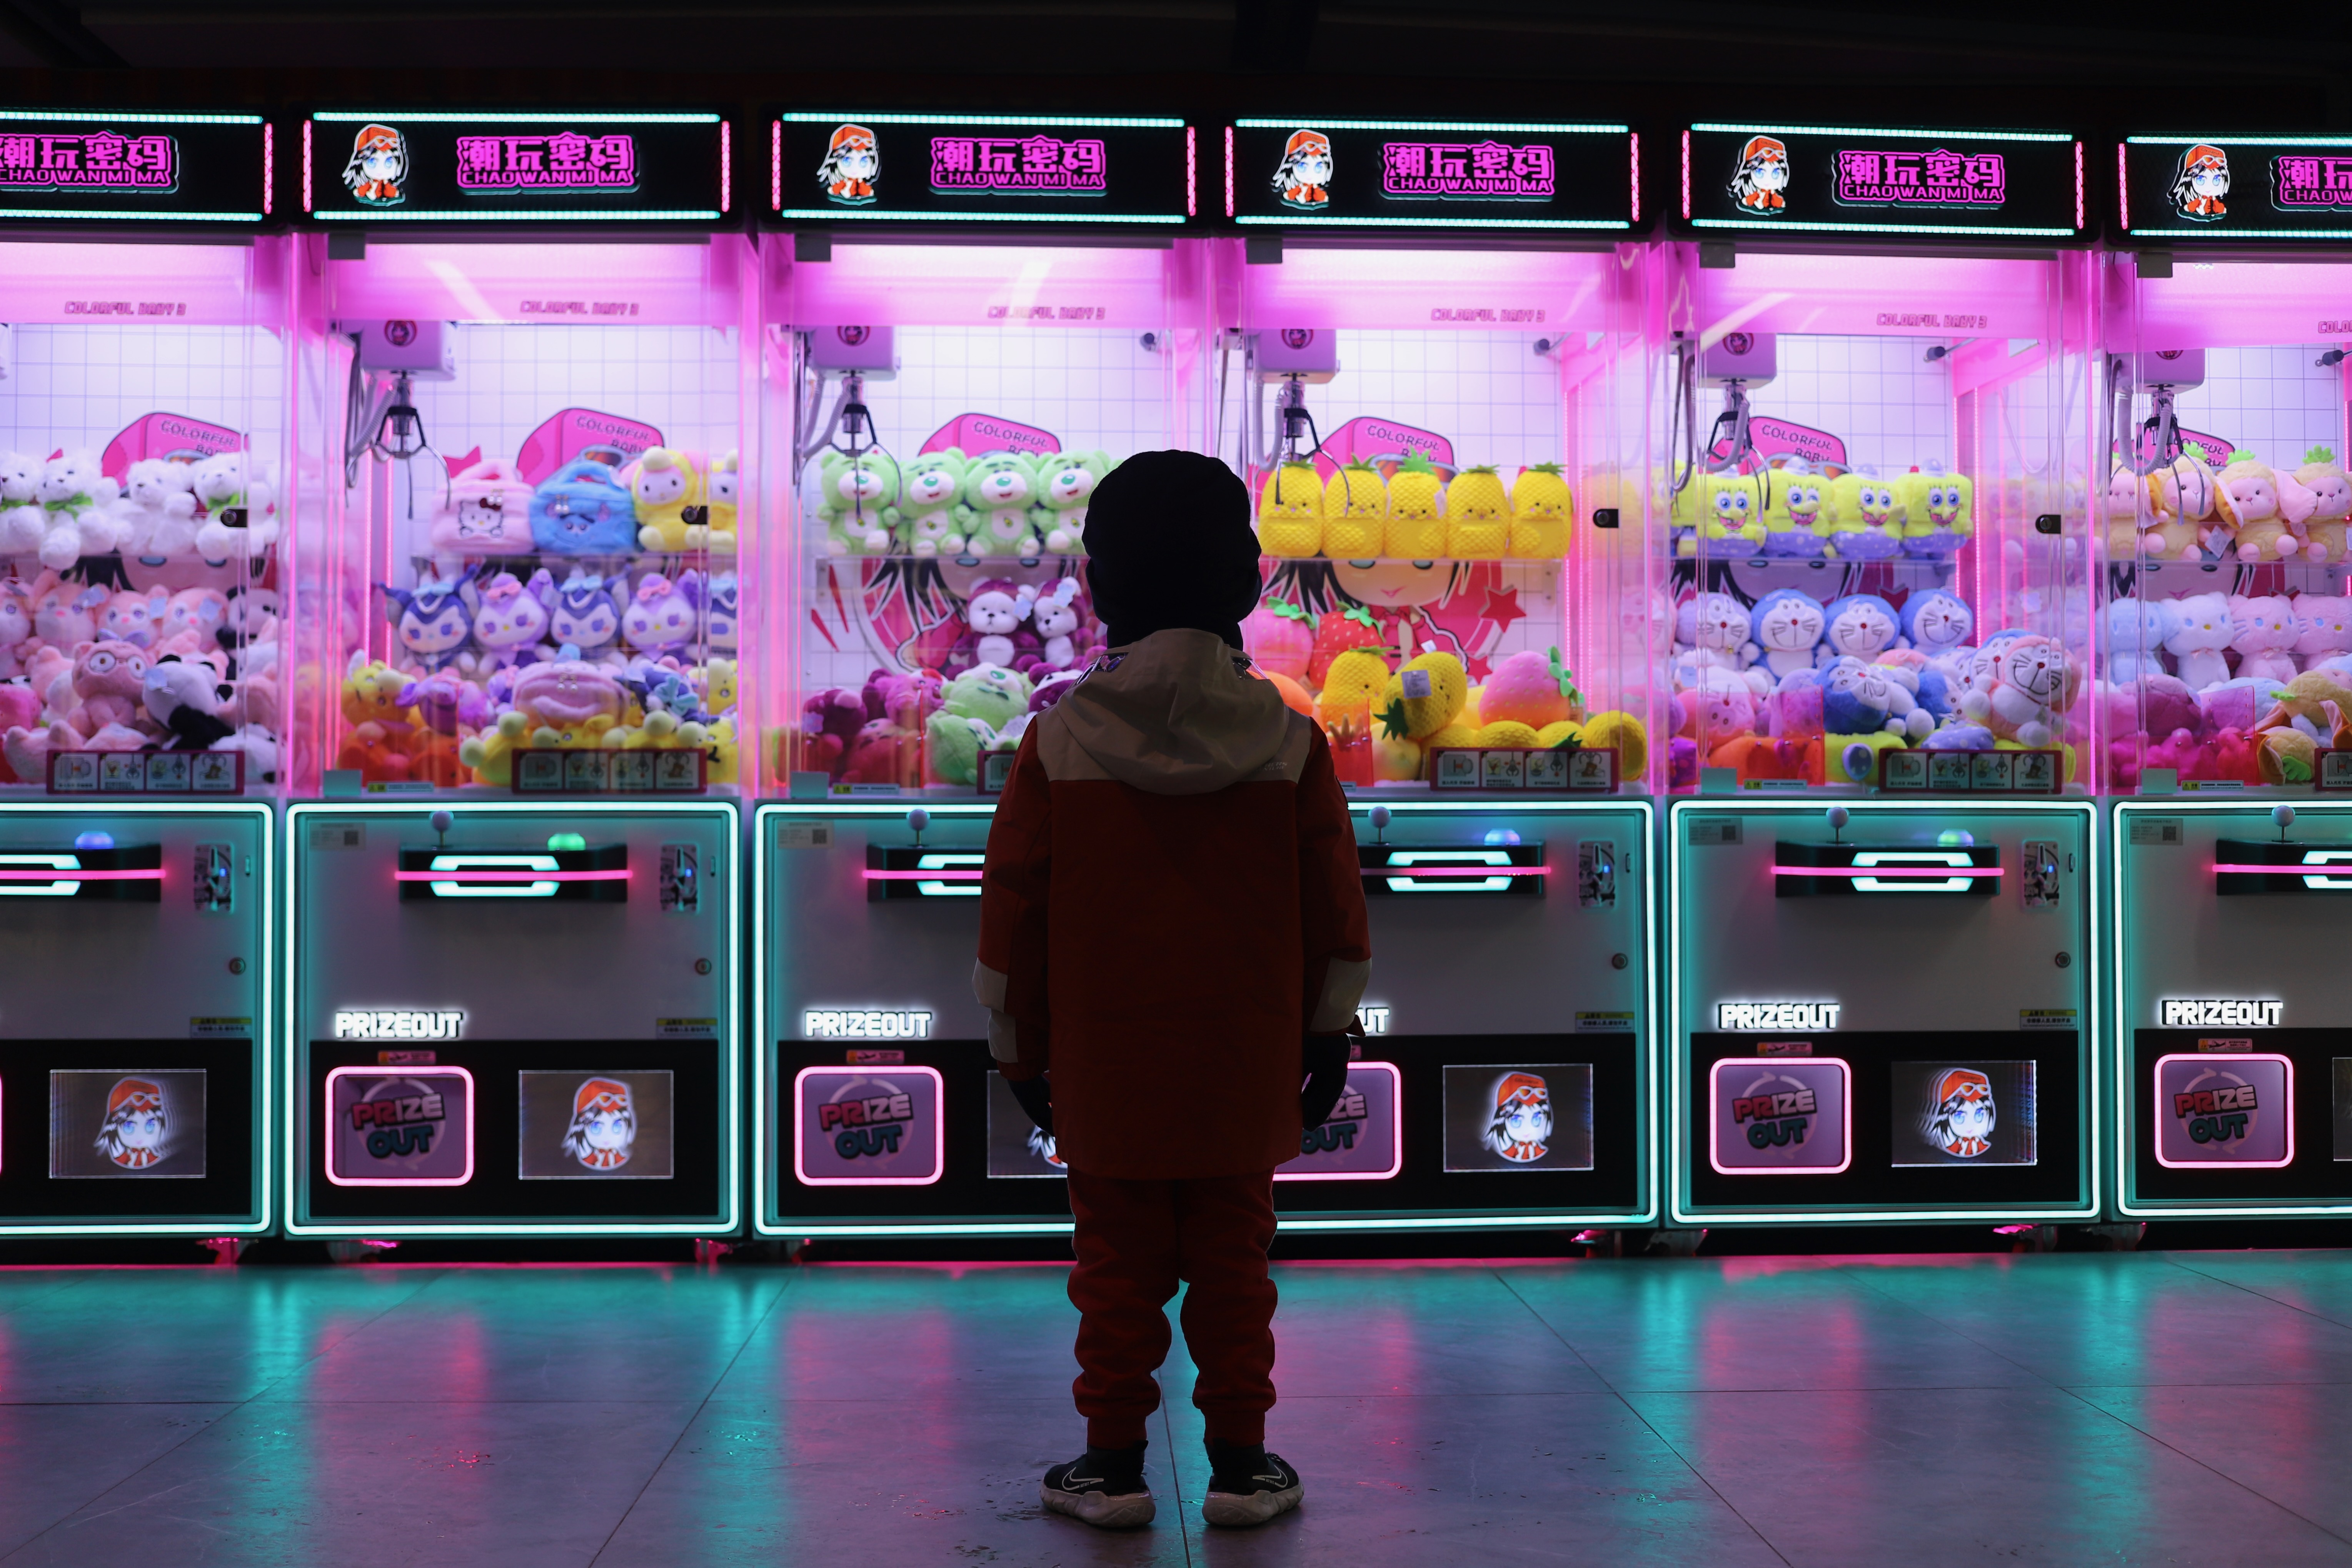 The shopping mall was empty. On a Saturday I&rsquo;d expect crowds of people sheltering from the cold outside. But there was no one here. The neon lights in this empty arcade had my son dancing around the floor until he realised we were watching him.